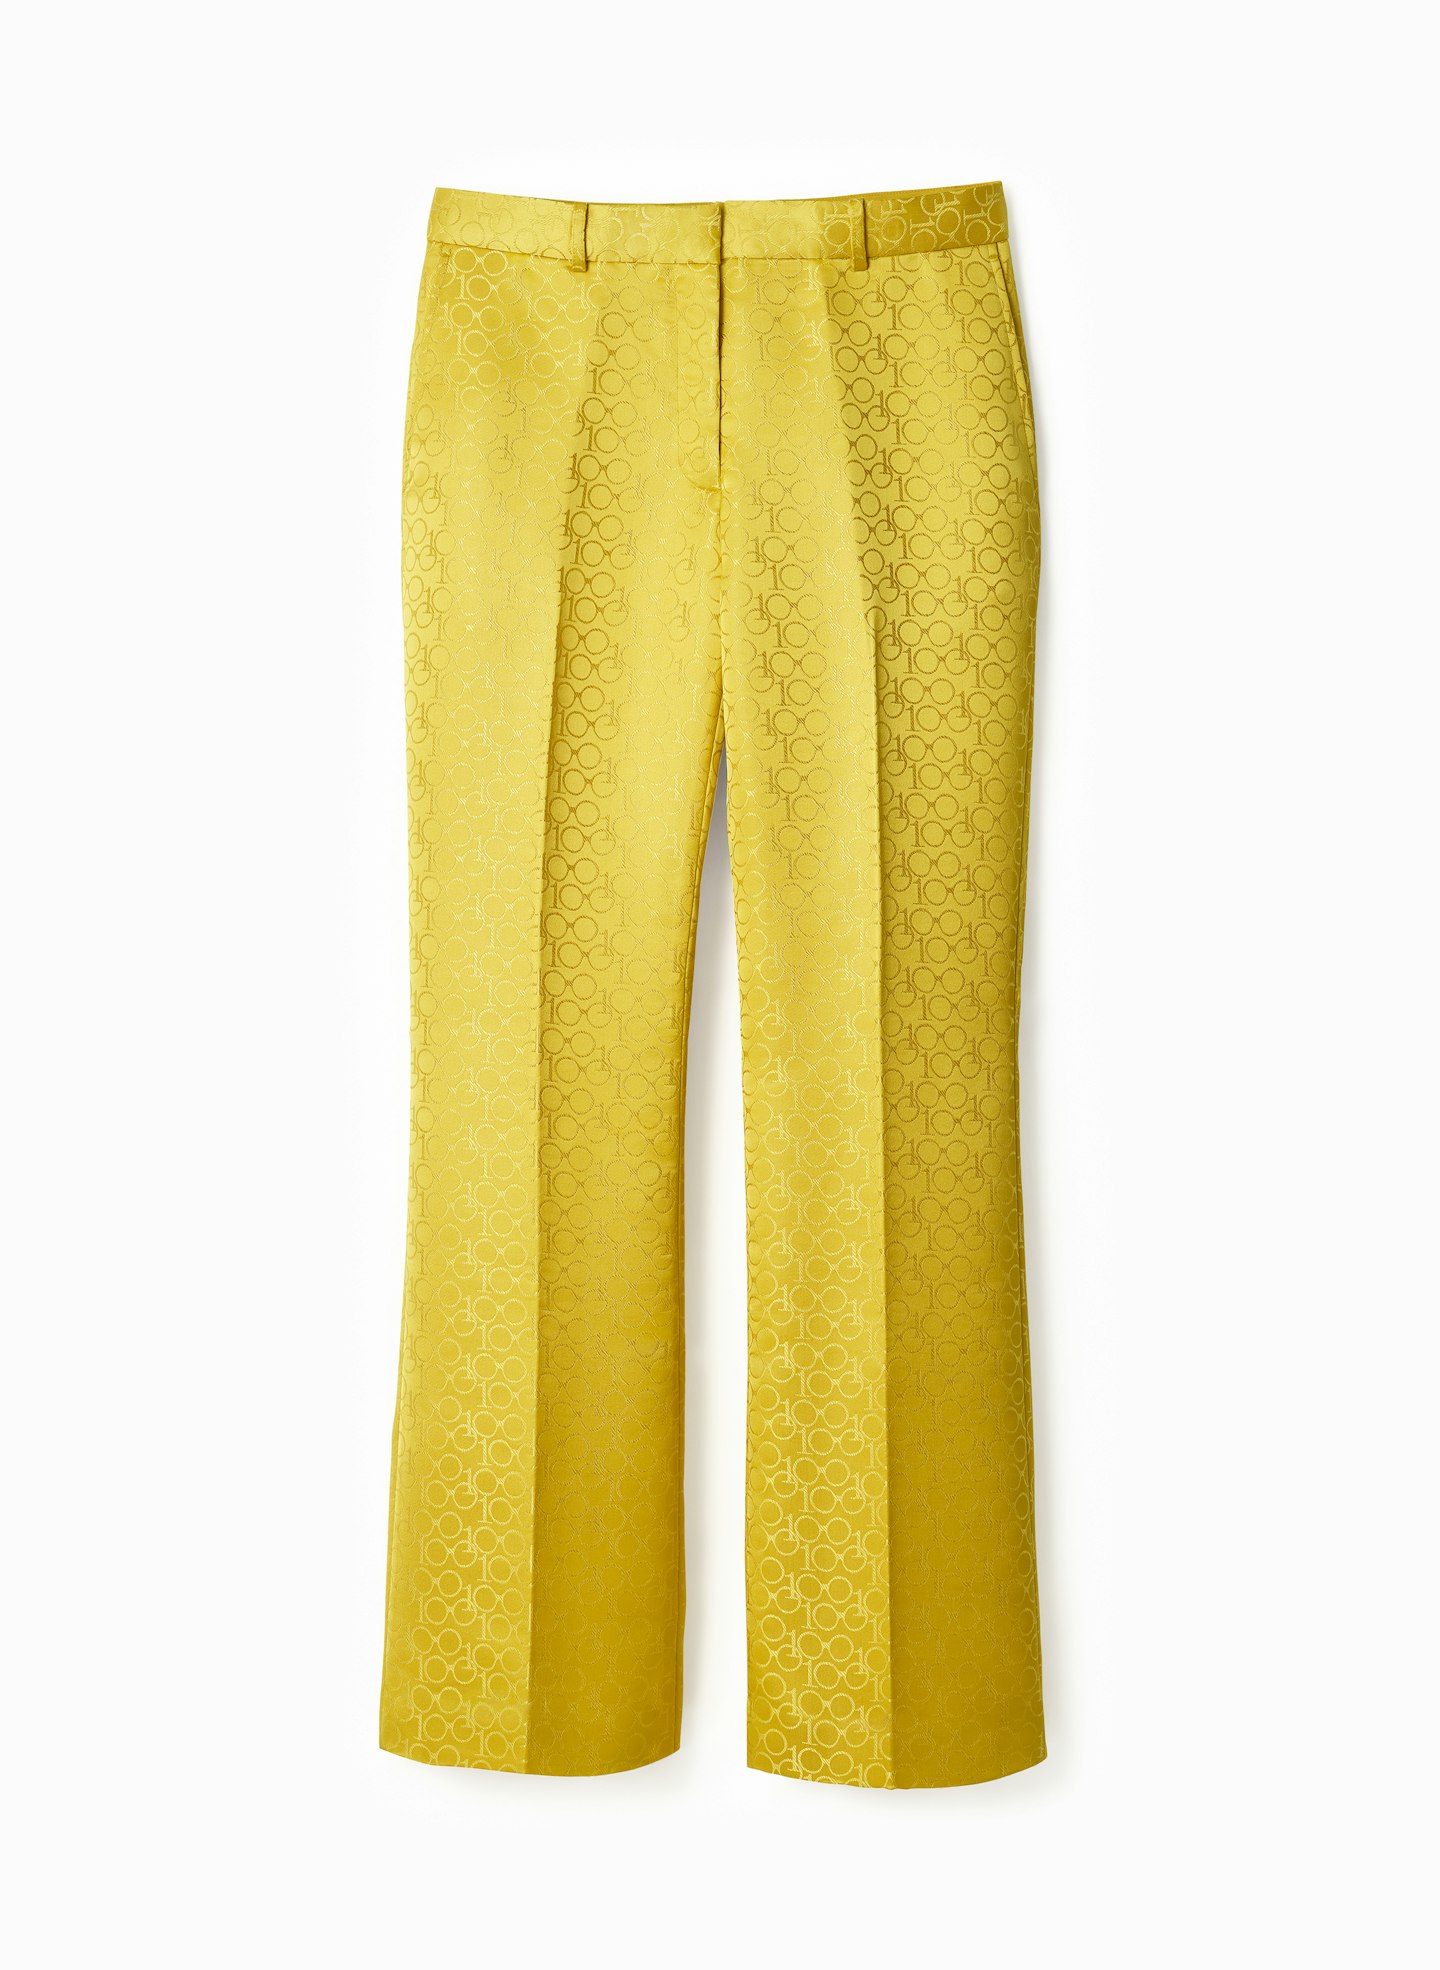 Trousers, £69.99